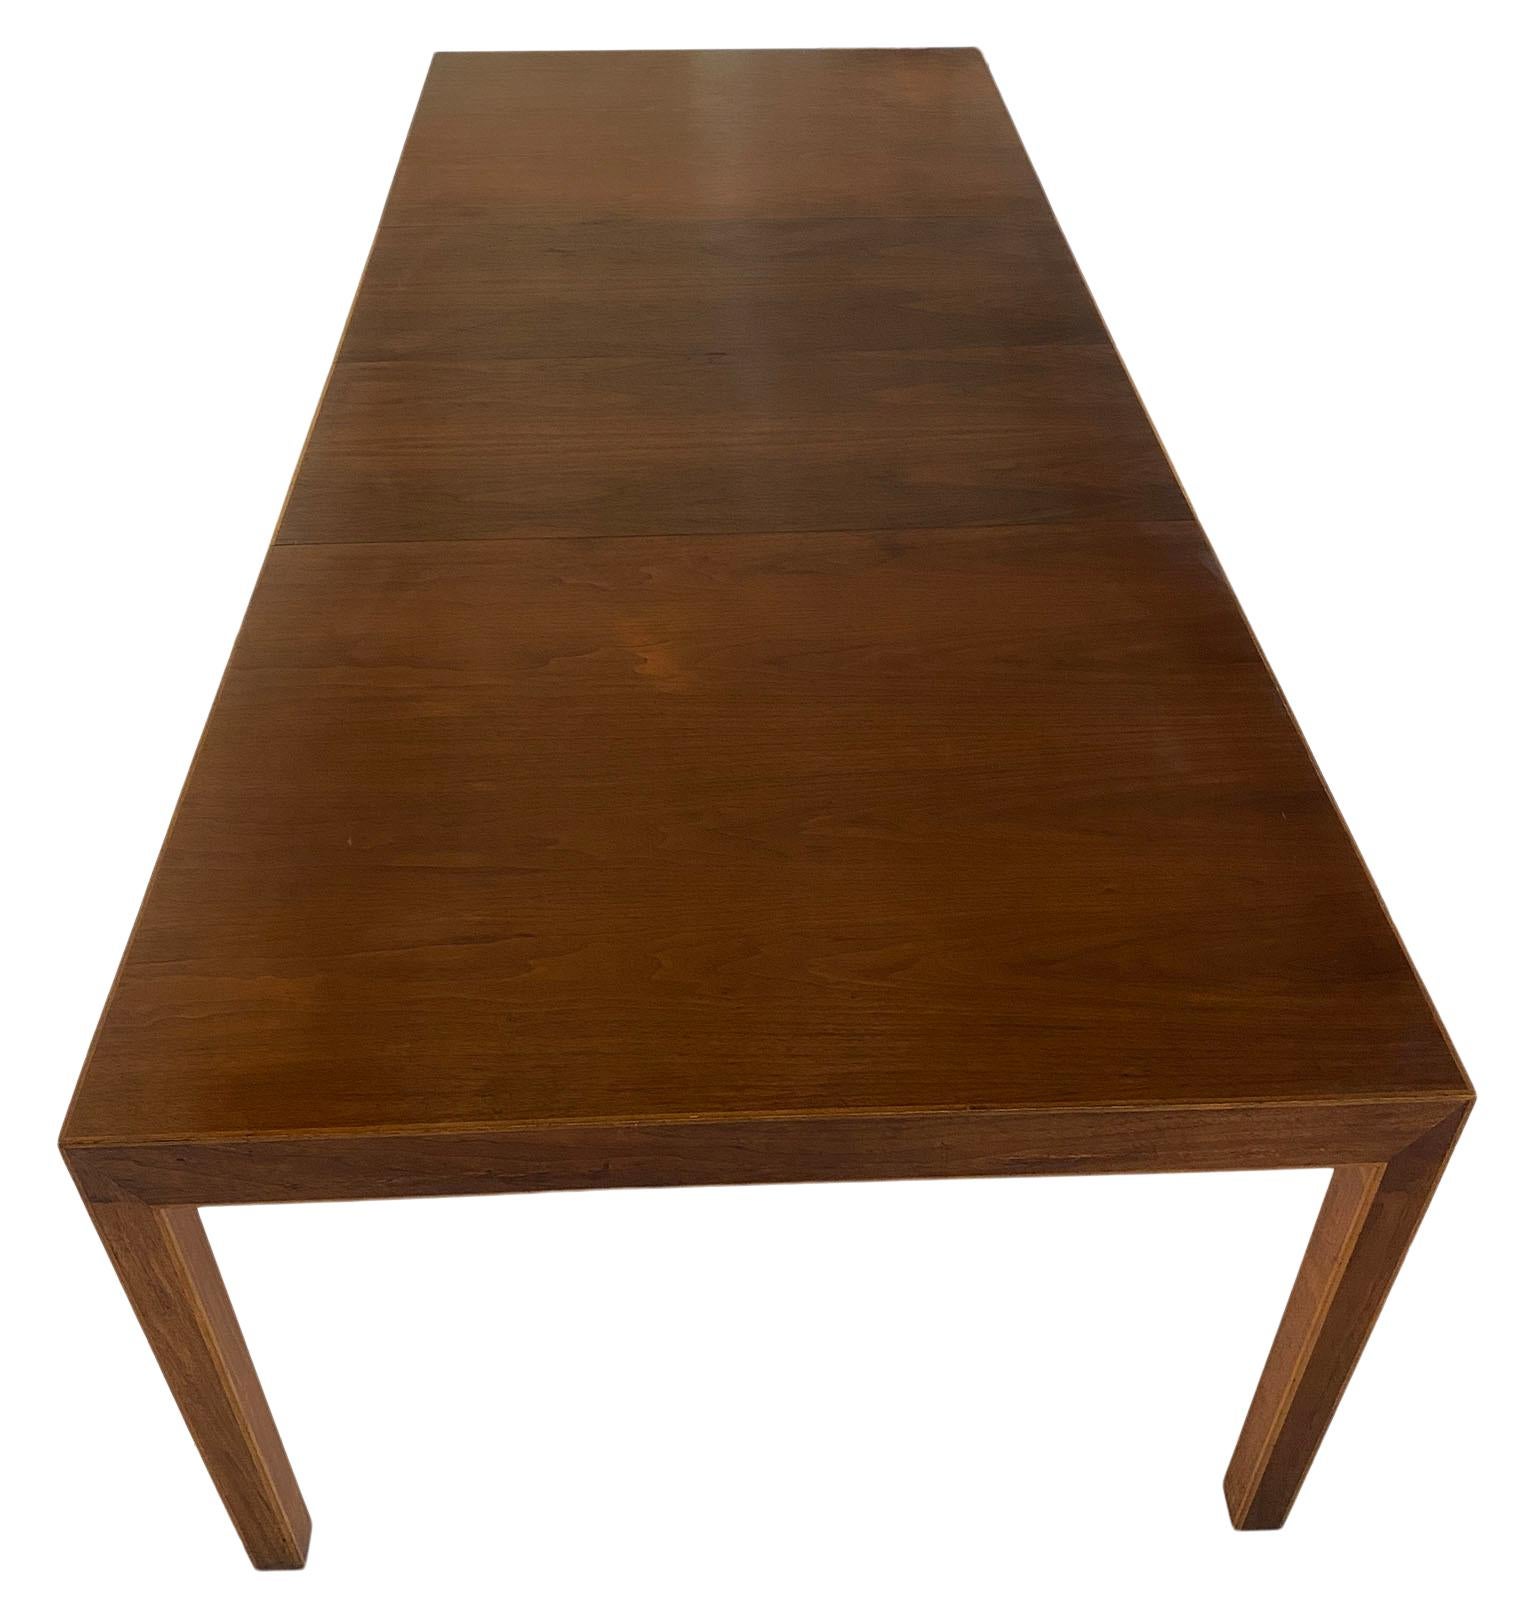 Mid-Century Modern American Milo Baughman Parsons dining table. Beautiful wood walnut tabletop with maple edge details. Solid walnut table base and legs. Made circa 1960. Original finish in good vintage condition leaves match the table close enough